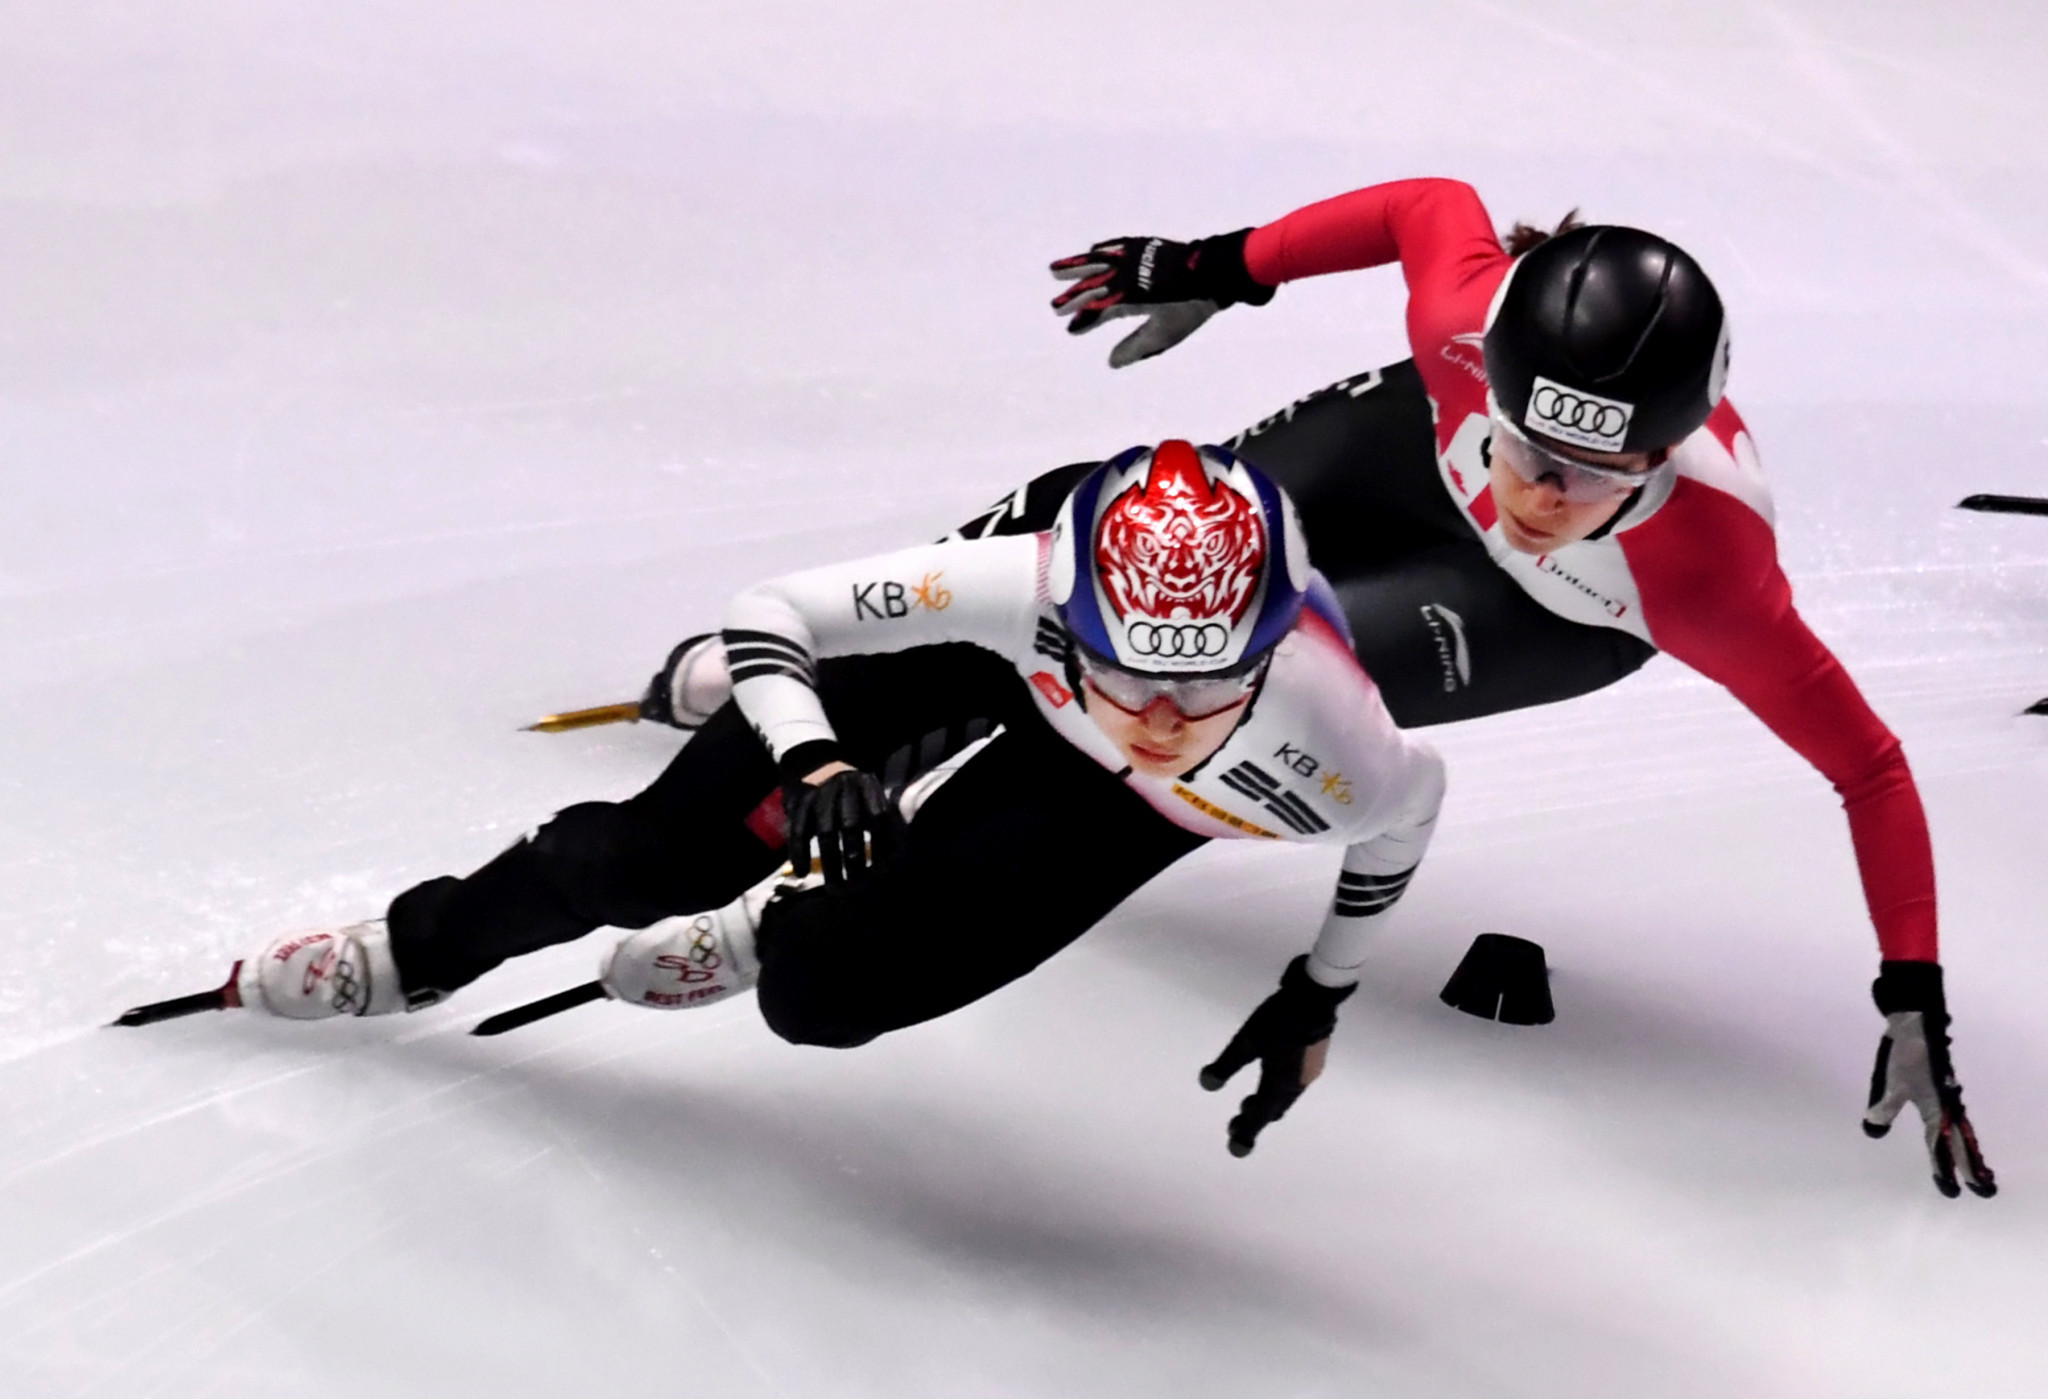 South Korea enjoy successful day of qualification at ISU Short Track World Cup